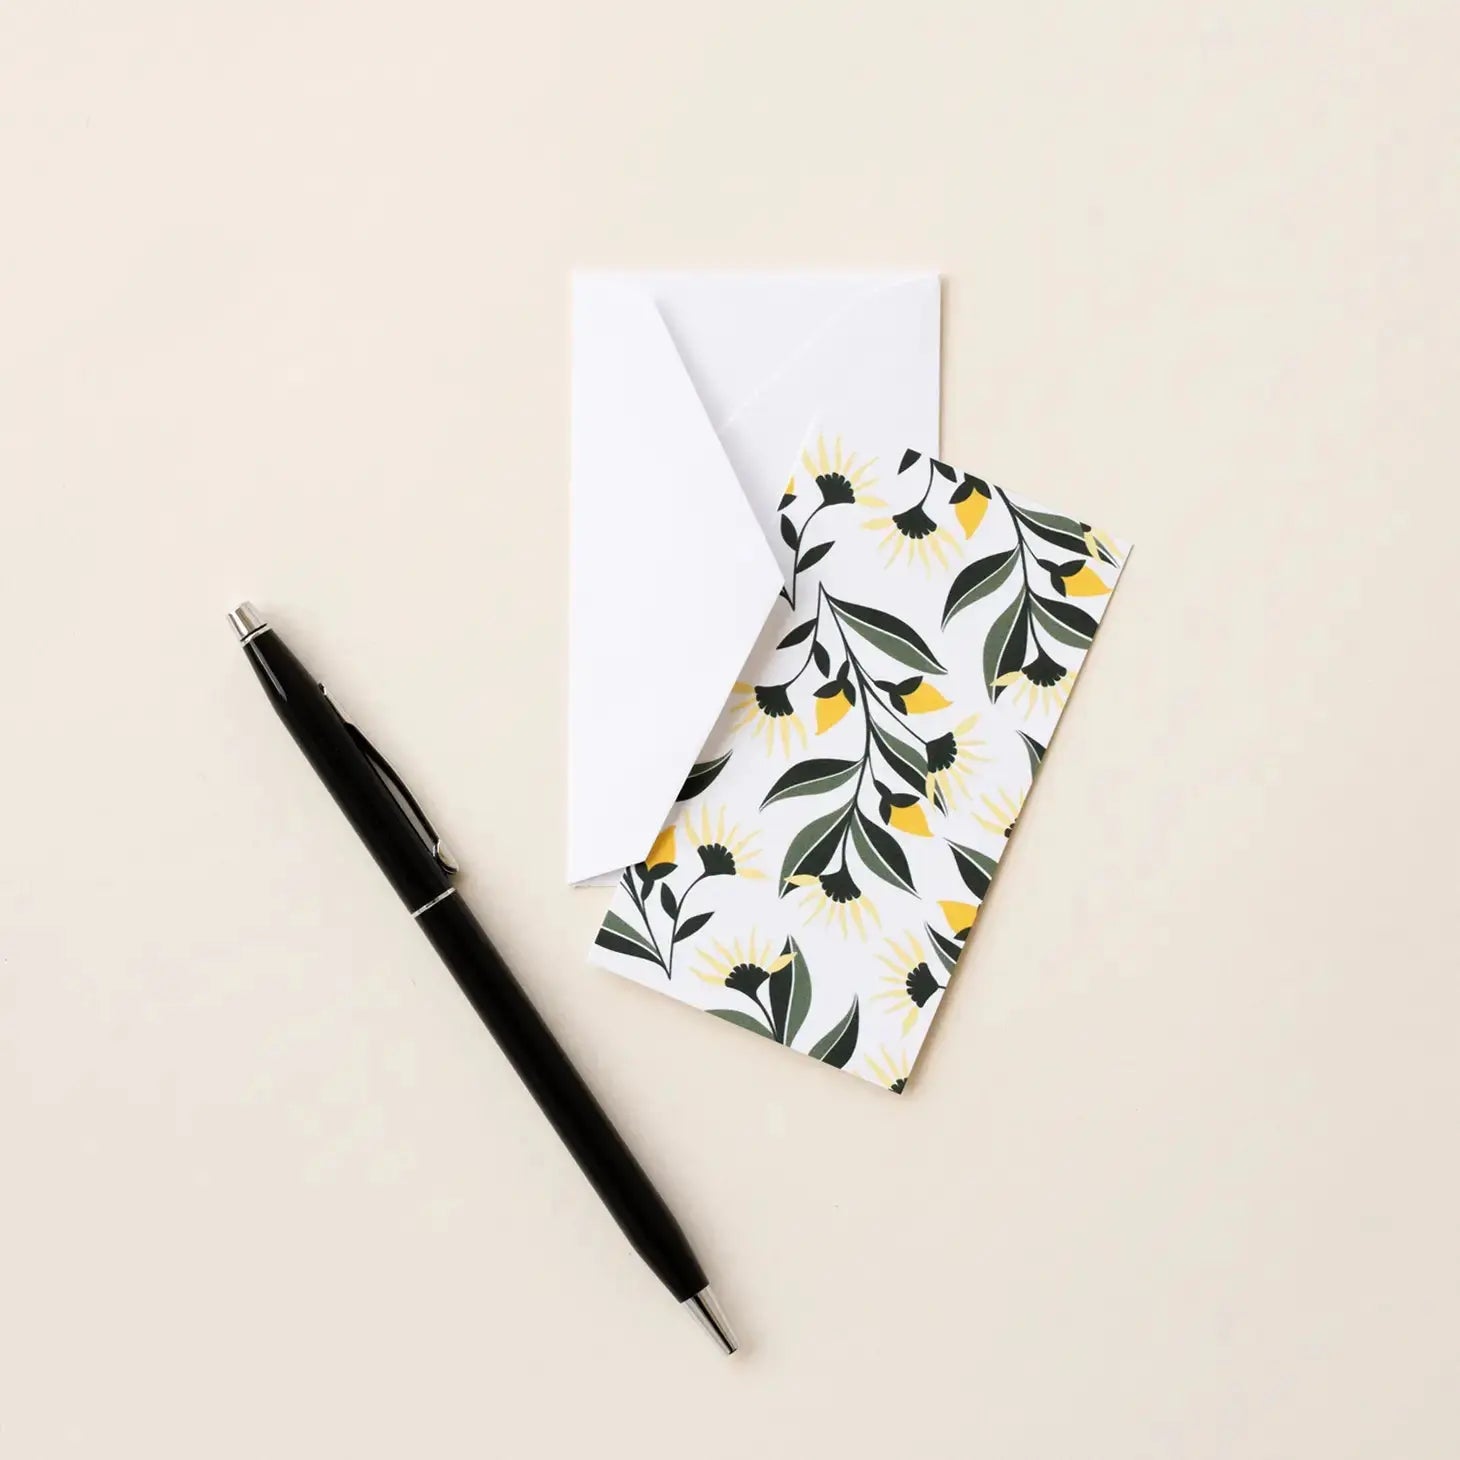 Mini Note Set - Aster Flowers - Home Smith